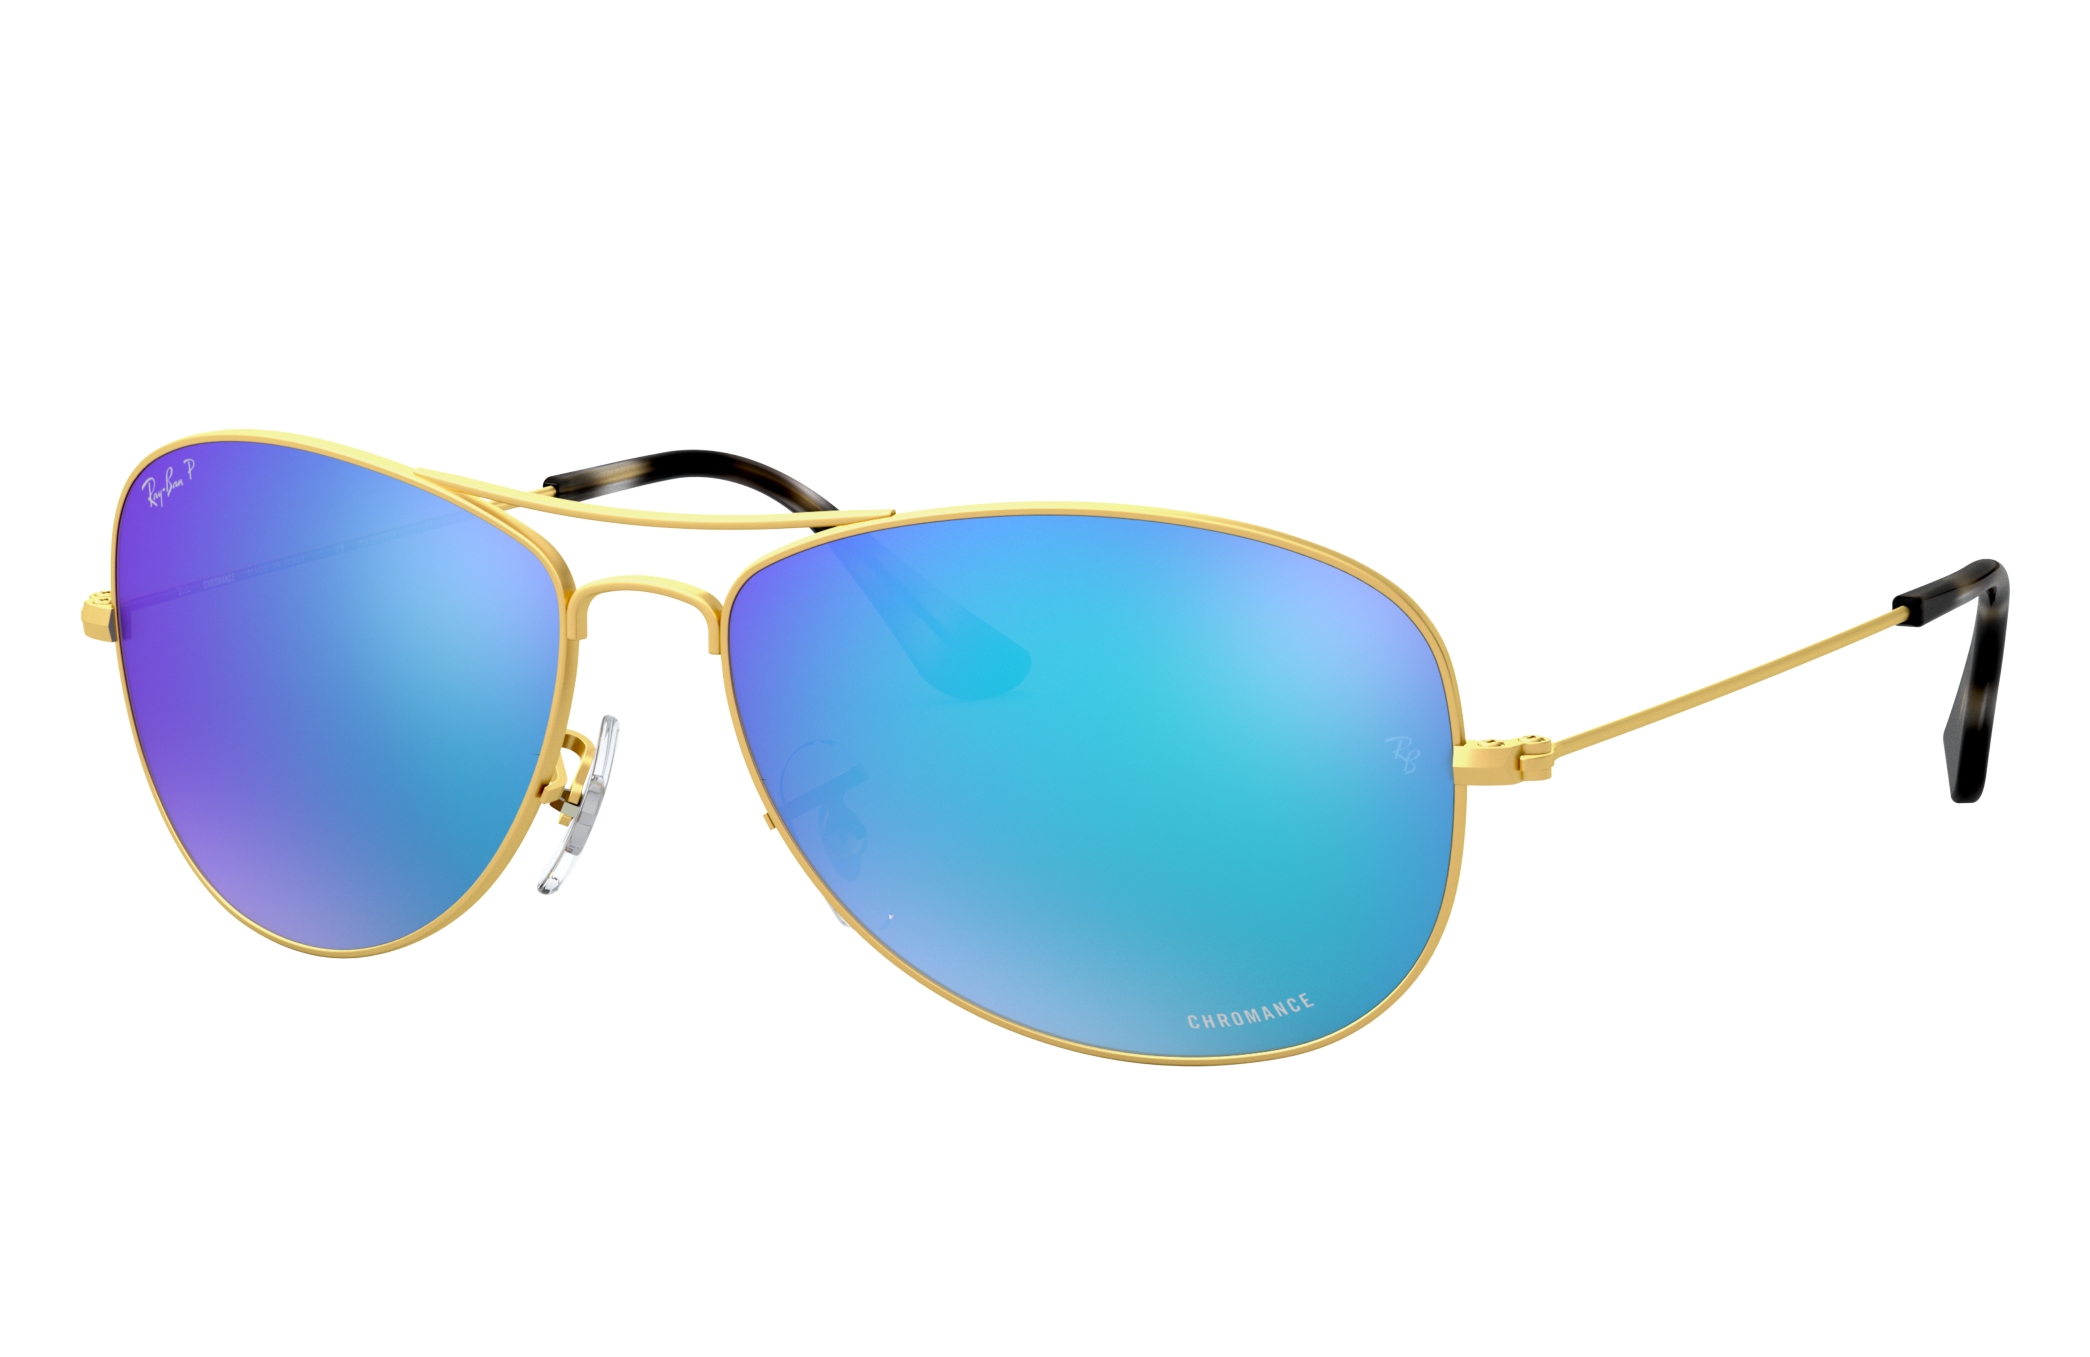 X Can T Find The Right Style Create Your Own In Custom Lab With A Choice Of Colors Lenses Temples And Engraving Customize Now Customize Your Shades And Add An Engraving For Free One Week Only Spend Over 150 And Get 25 Off Cashback Voucher It Ll